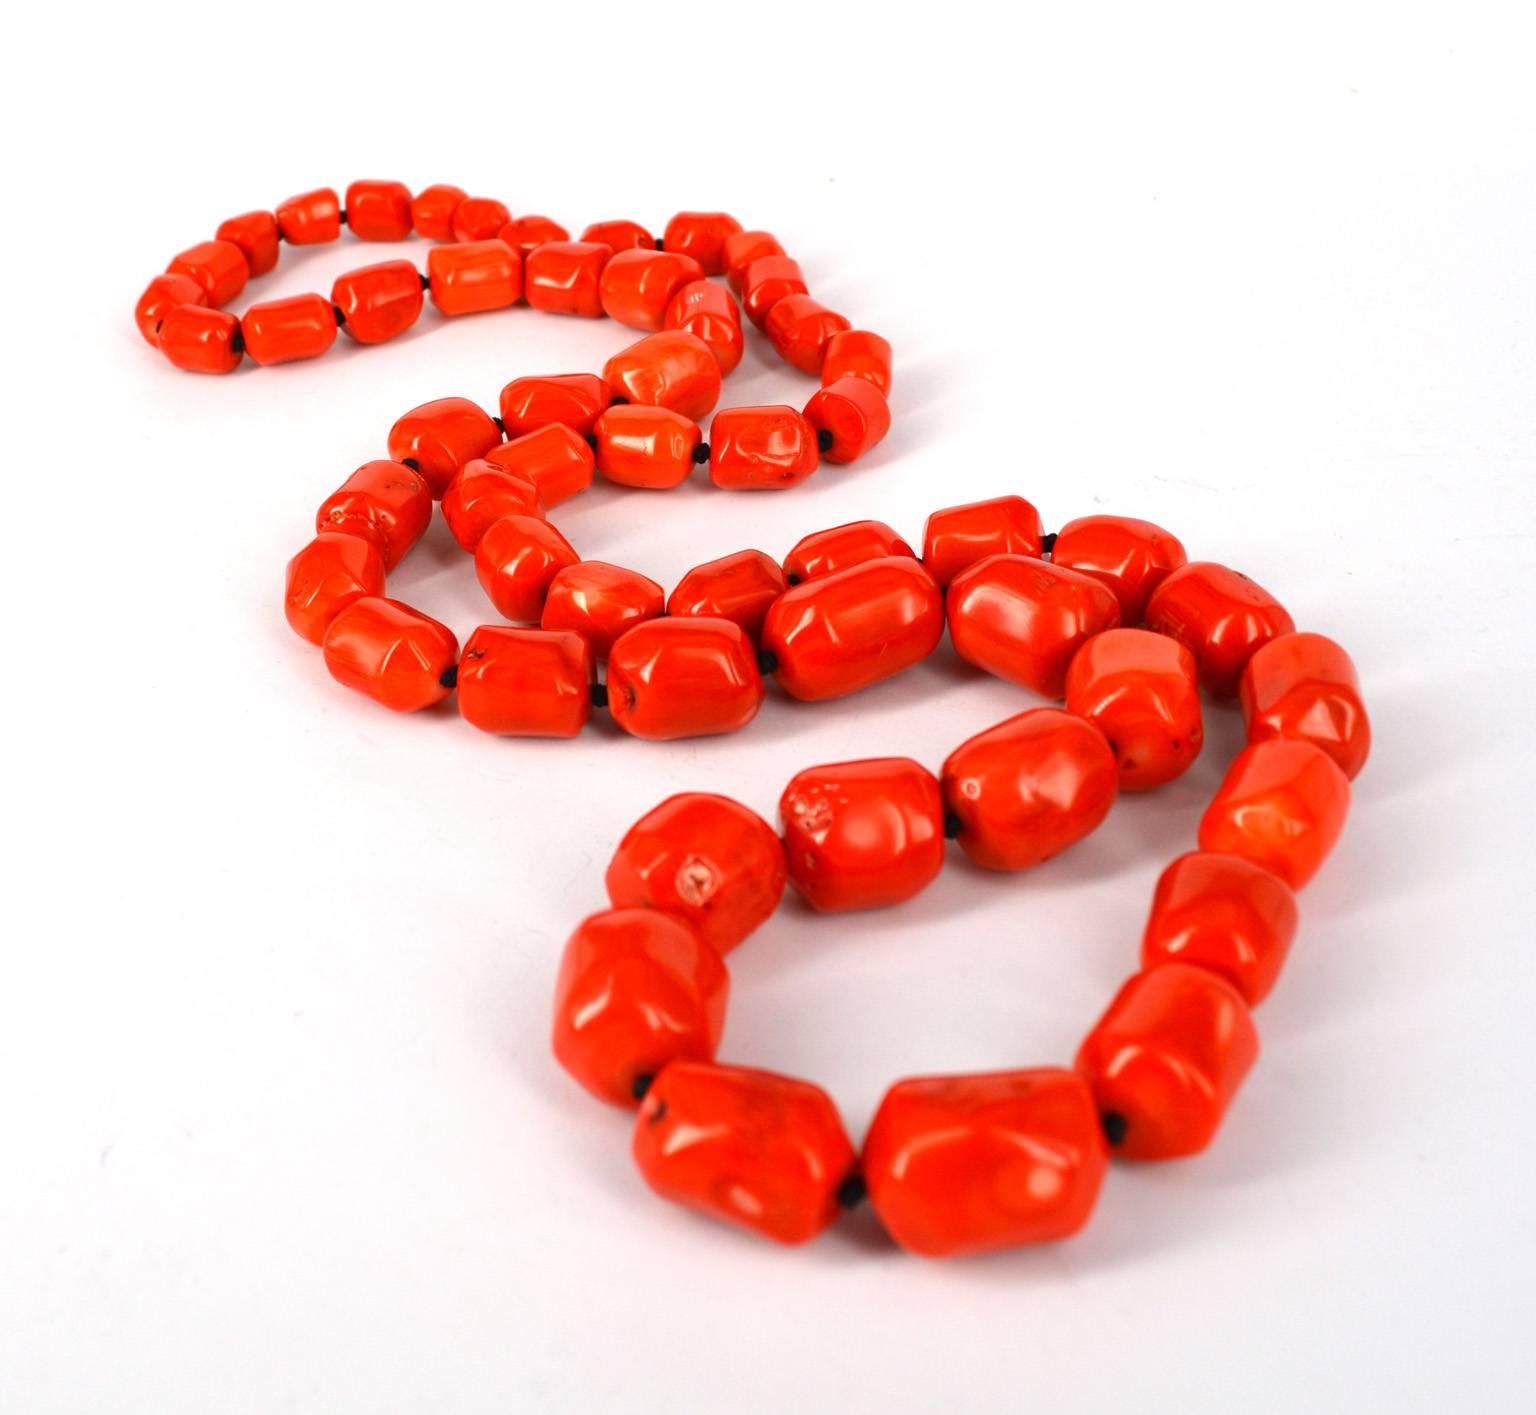 Graduated orange sea bamboo coral nuggets orange and hand knotted on a black thread.
Total necklace length 100cm long. 